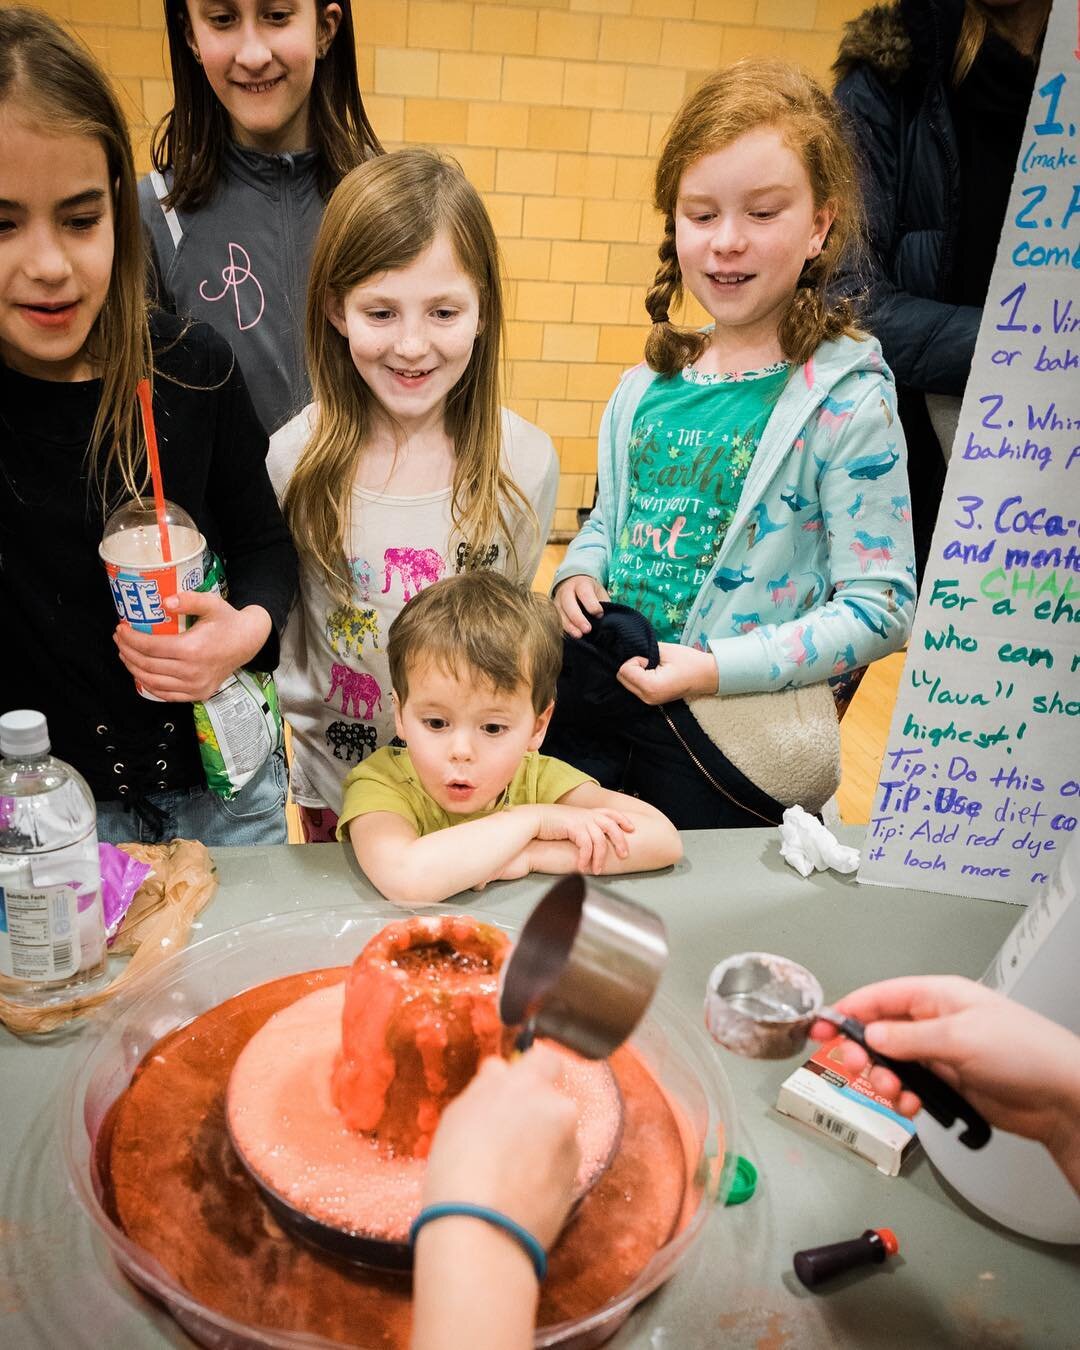 What's a elementary school science fair without a live volcano?